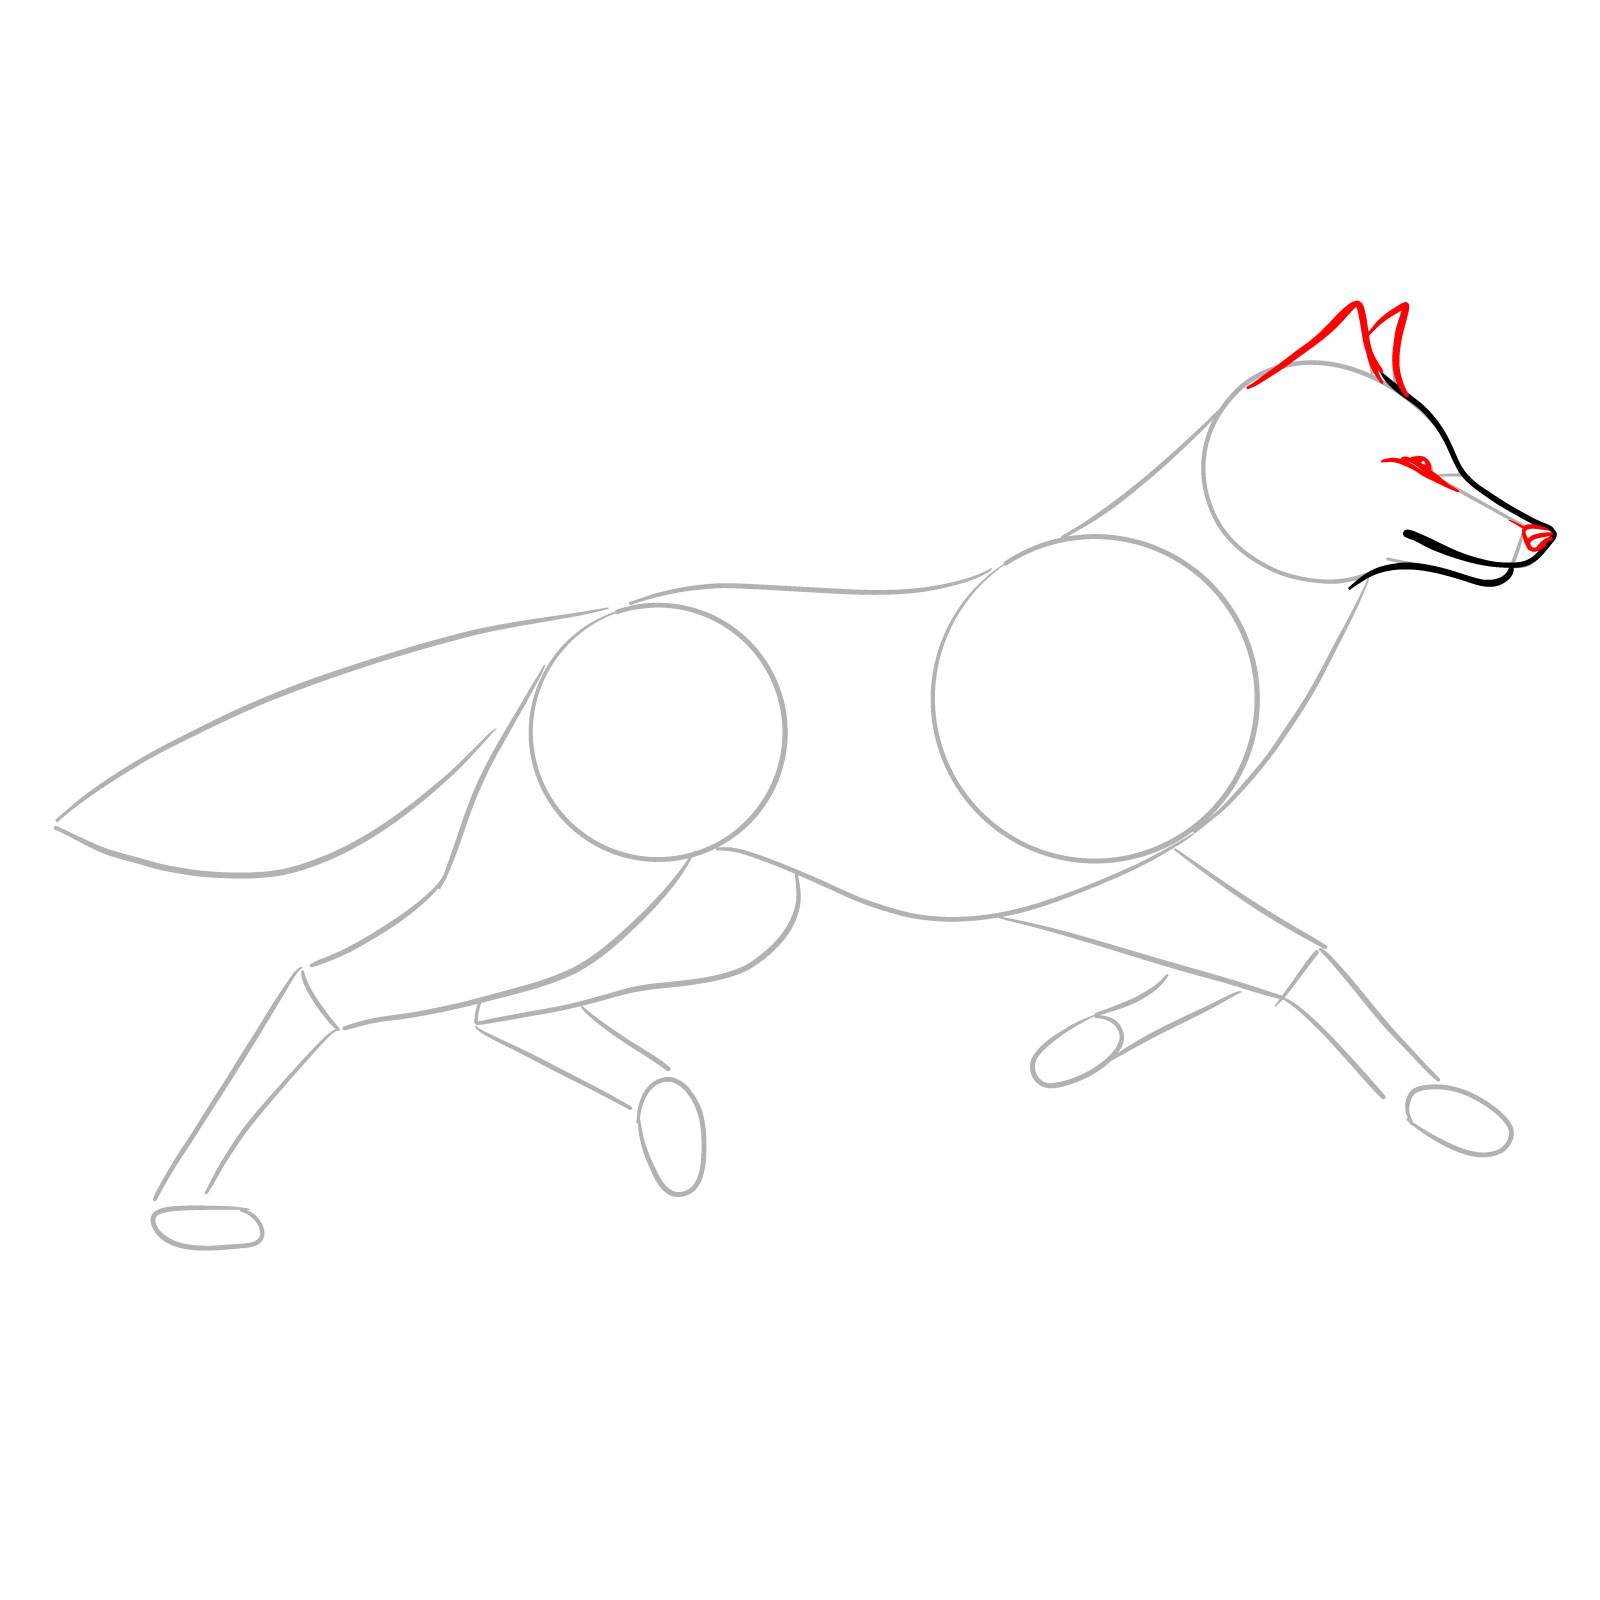 Detailing the eye, nose, and ears in a step-by-step running wolf drawing - step 04